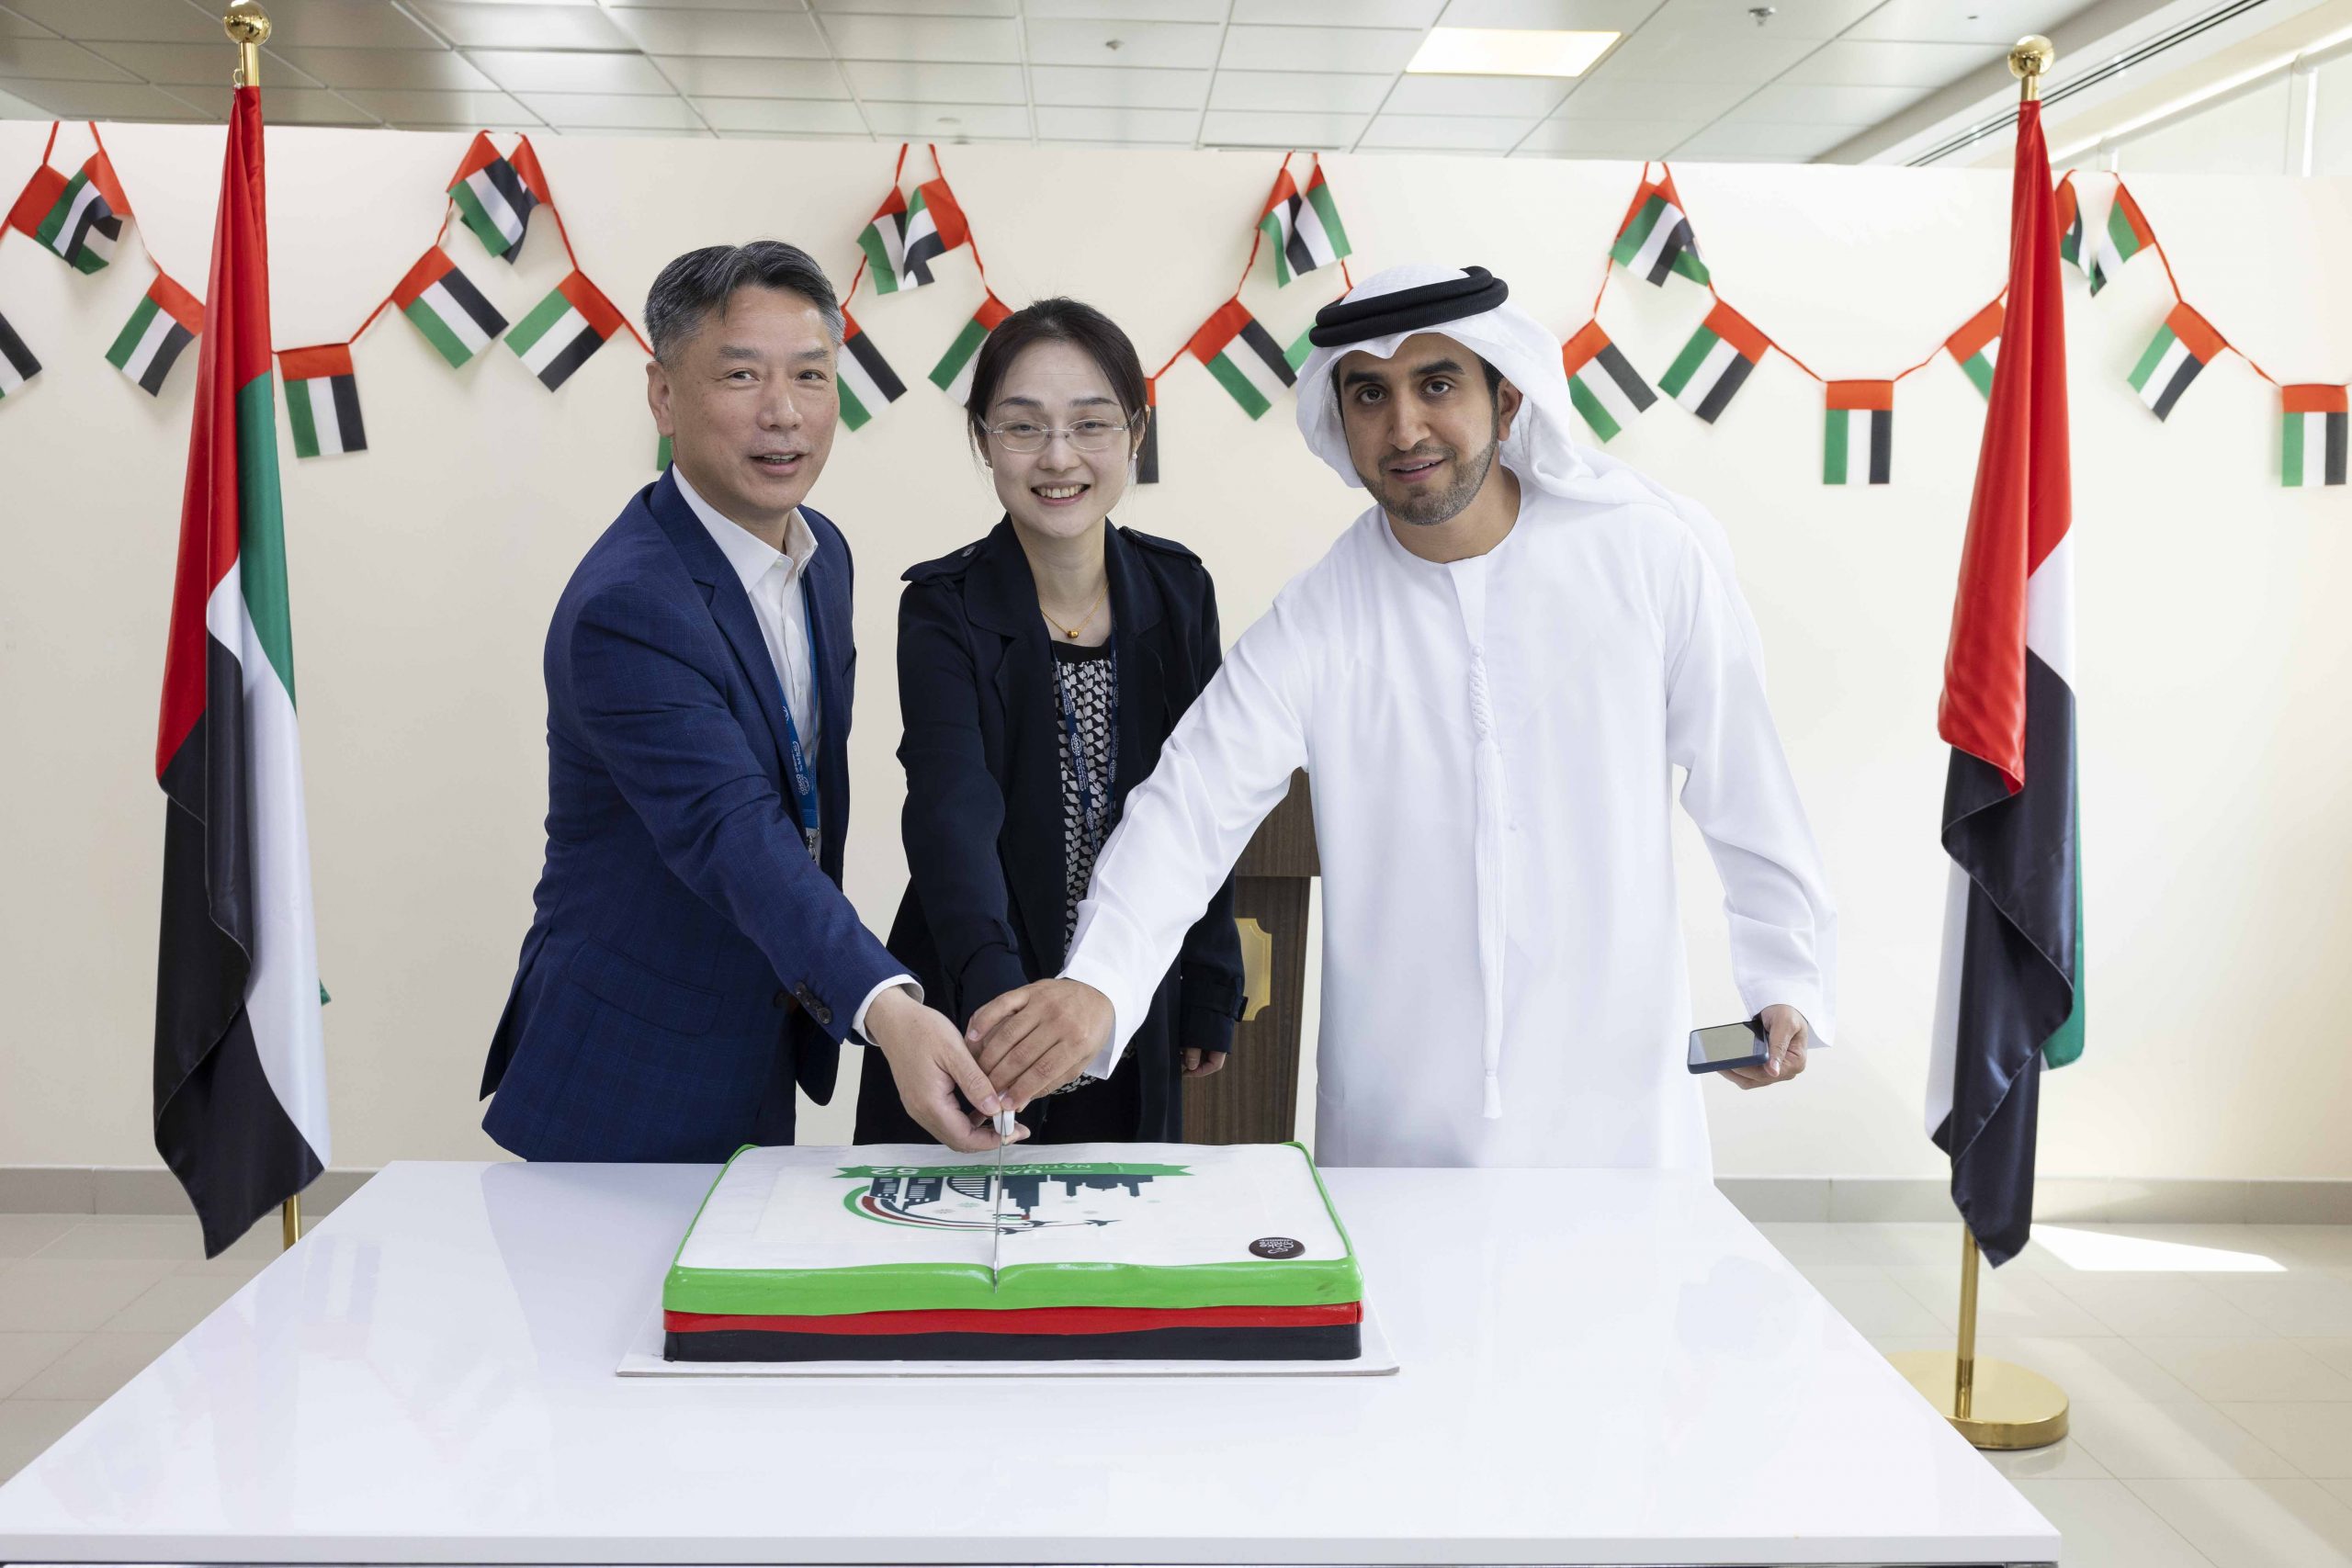 CSP Abu Dhabi Terminal (CSPADT) proudly celebrated the 52nd UAE National Day at its terminal located in Khalifa Port, Abu Dhabi.